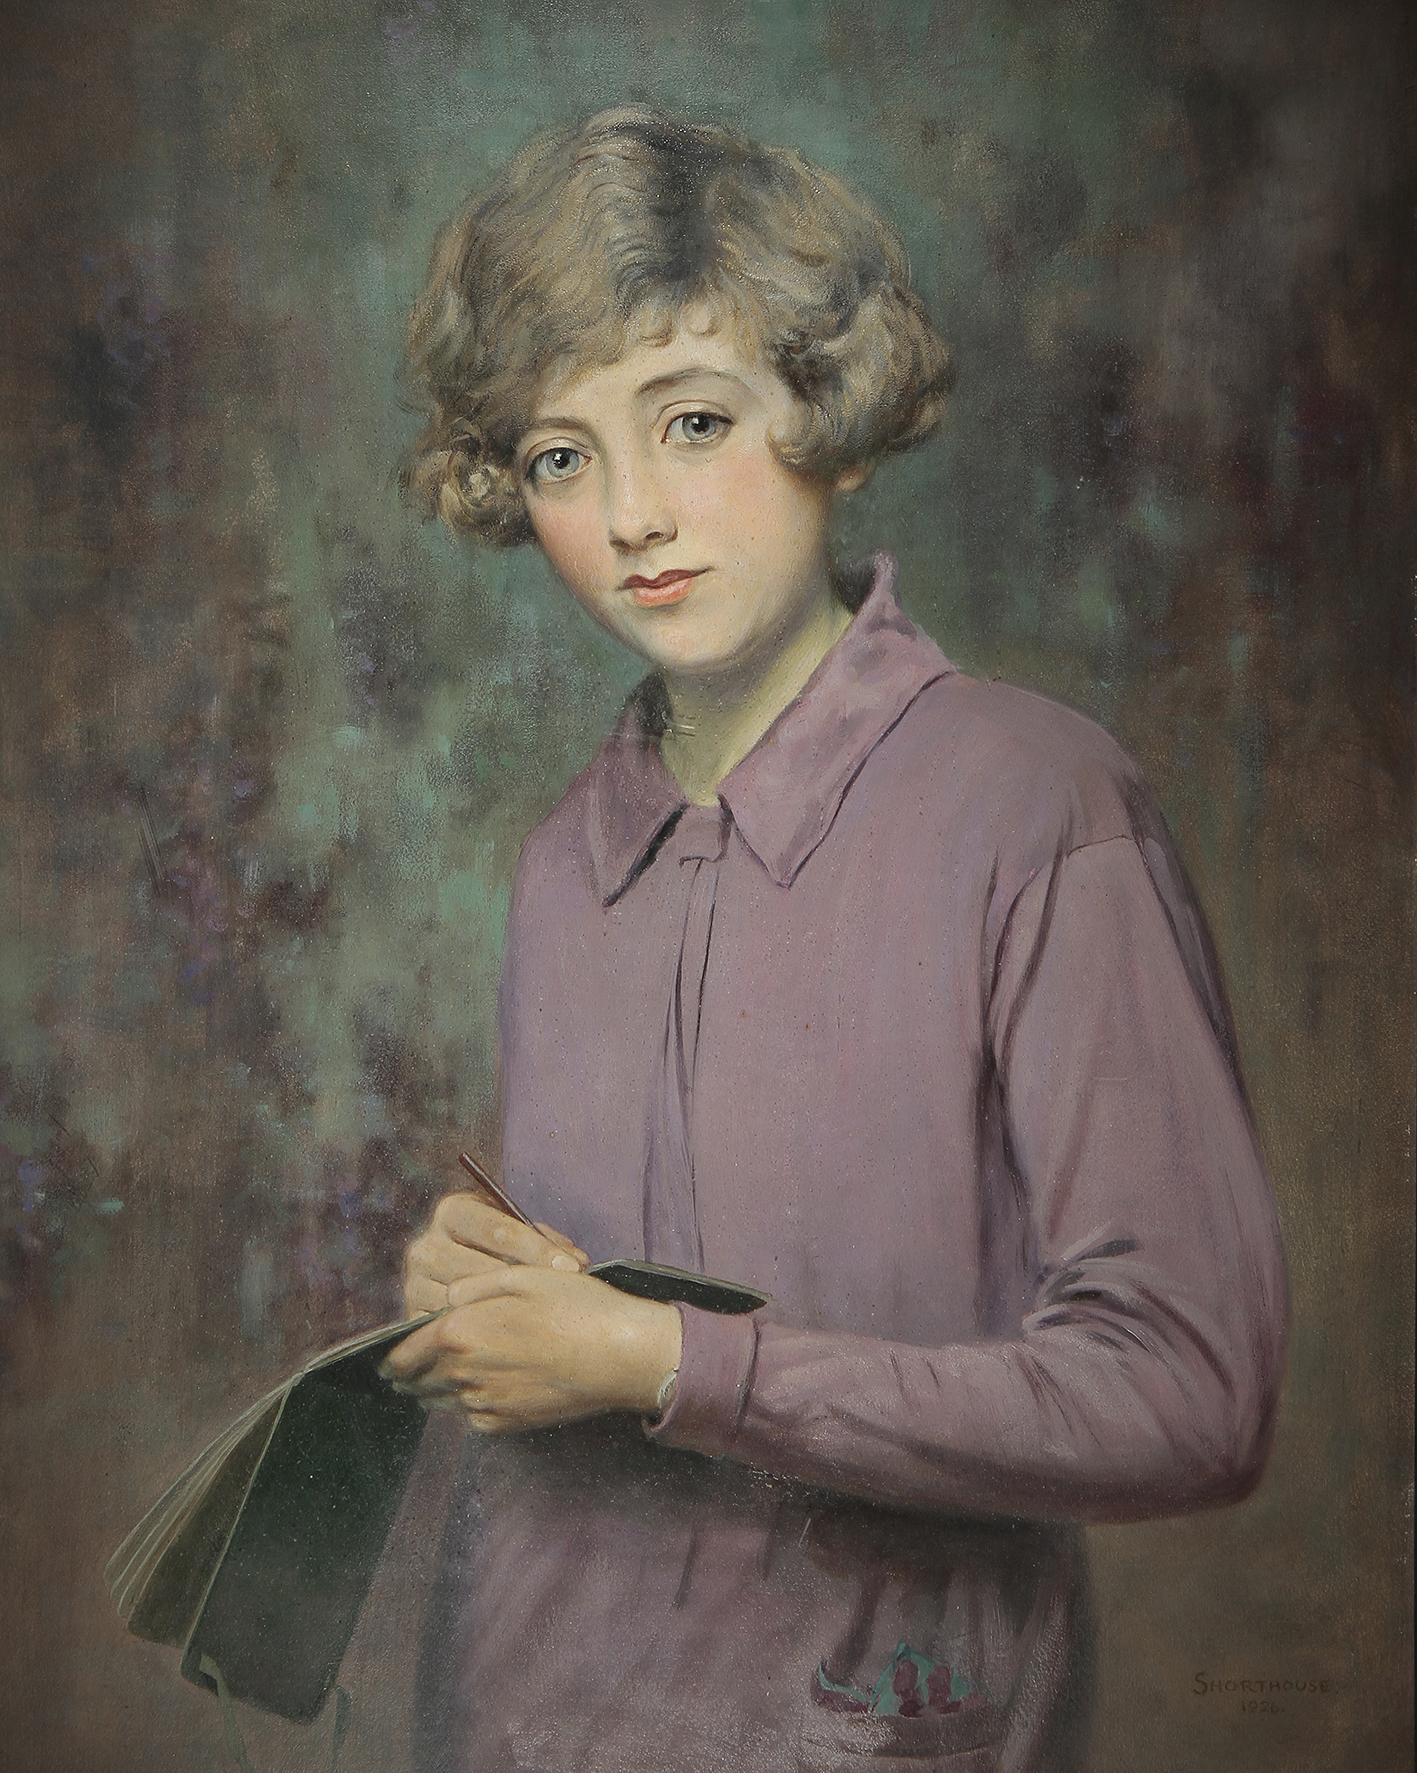 Painting of a young girl in a purple dress